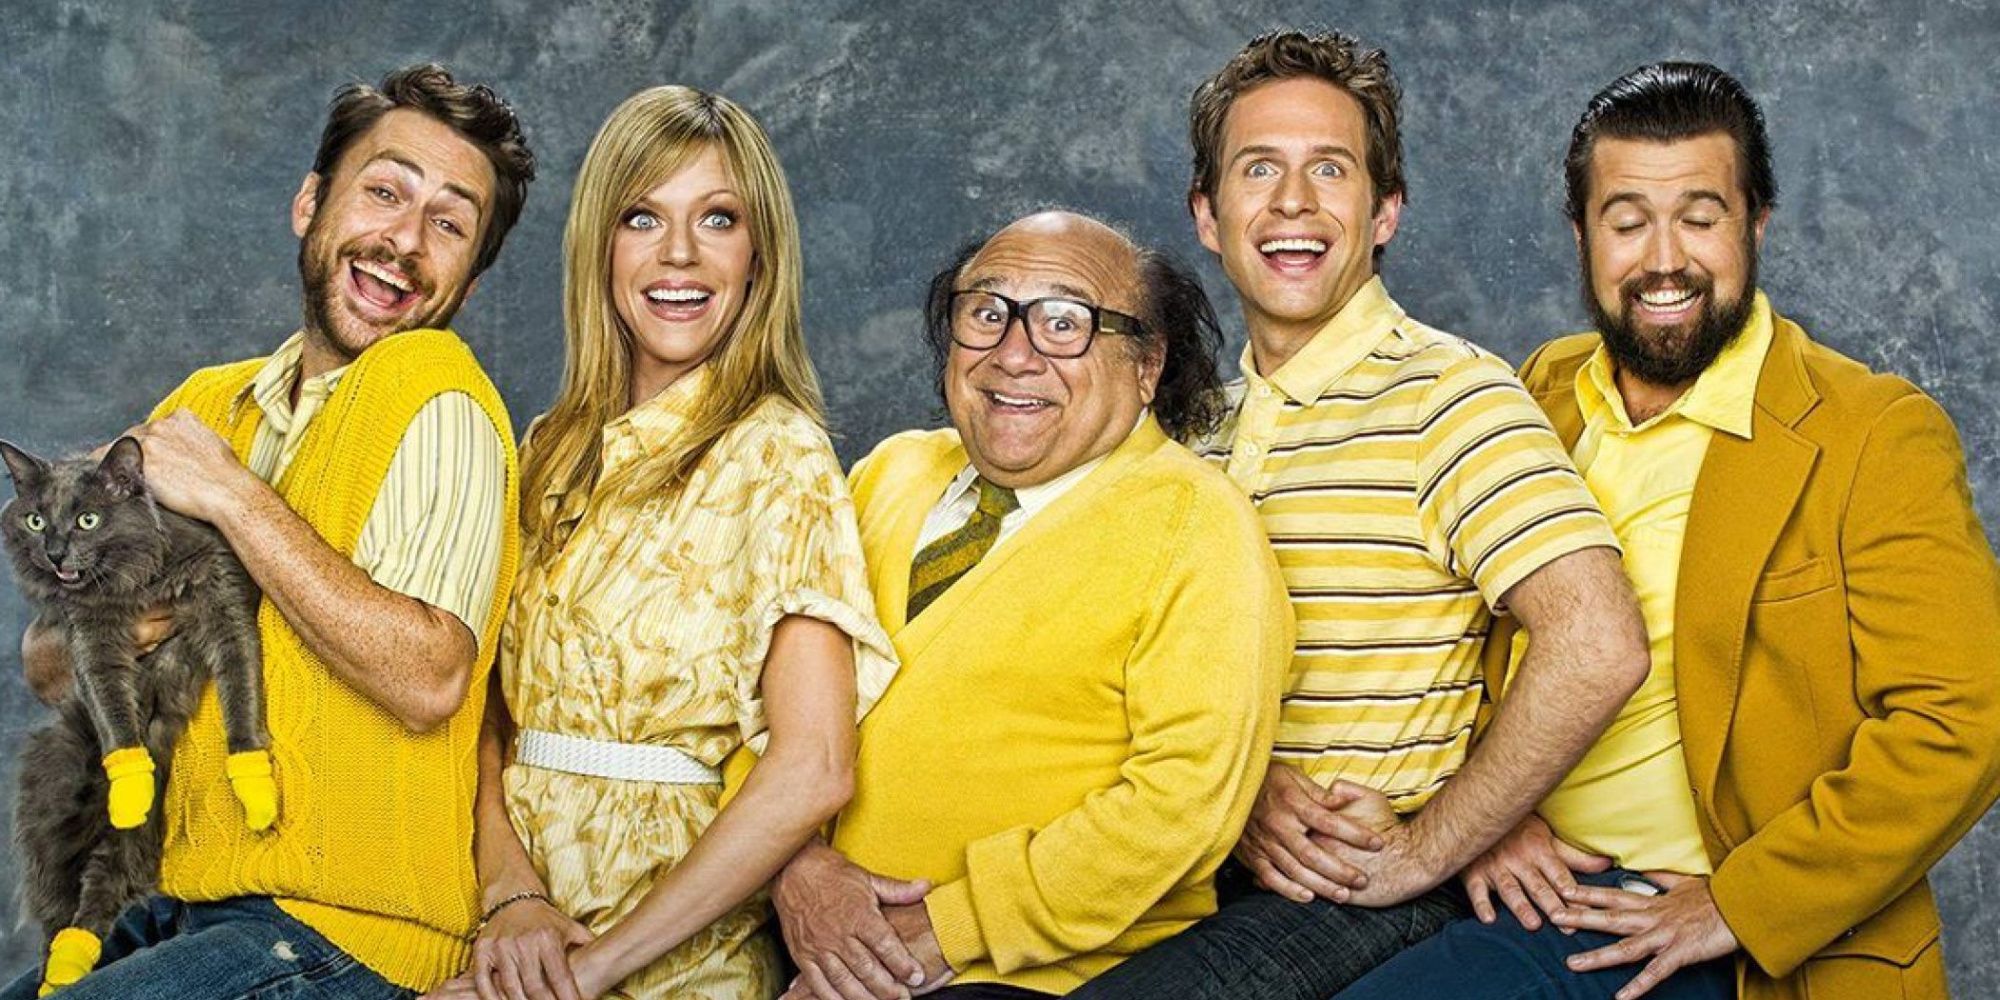 The cast of It's Always Sunny In Philadelphia smiling ridiculously for a photo.